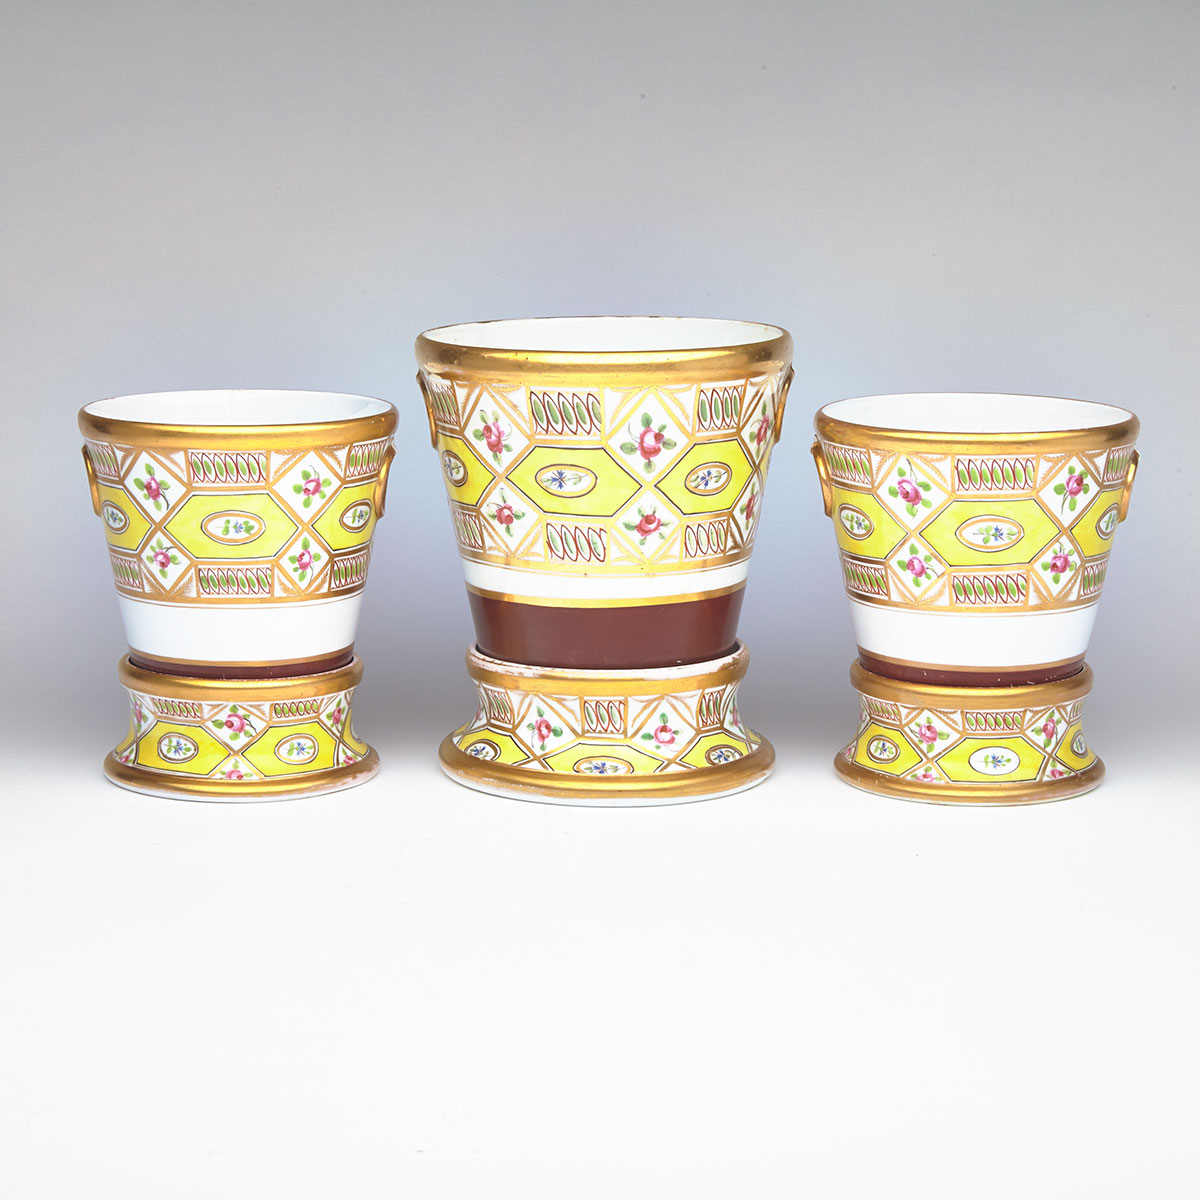 Garniture of Three Spode ‘Church Gresley’ Cachepots and Stands, c.1820